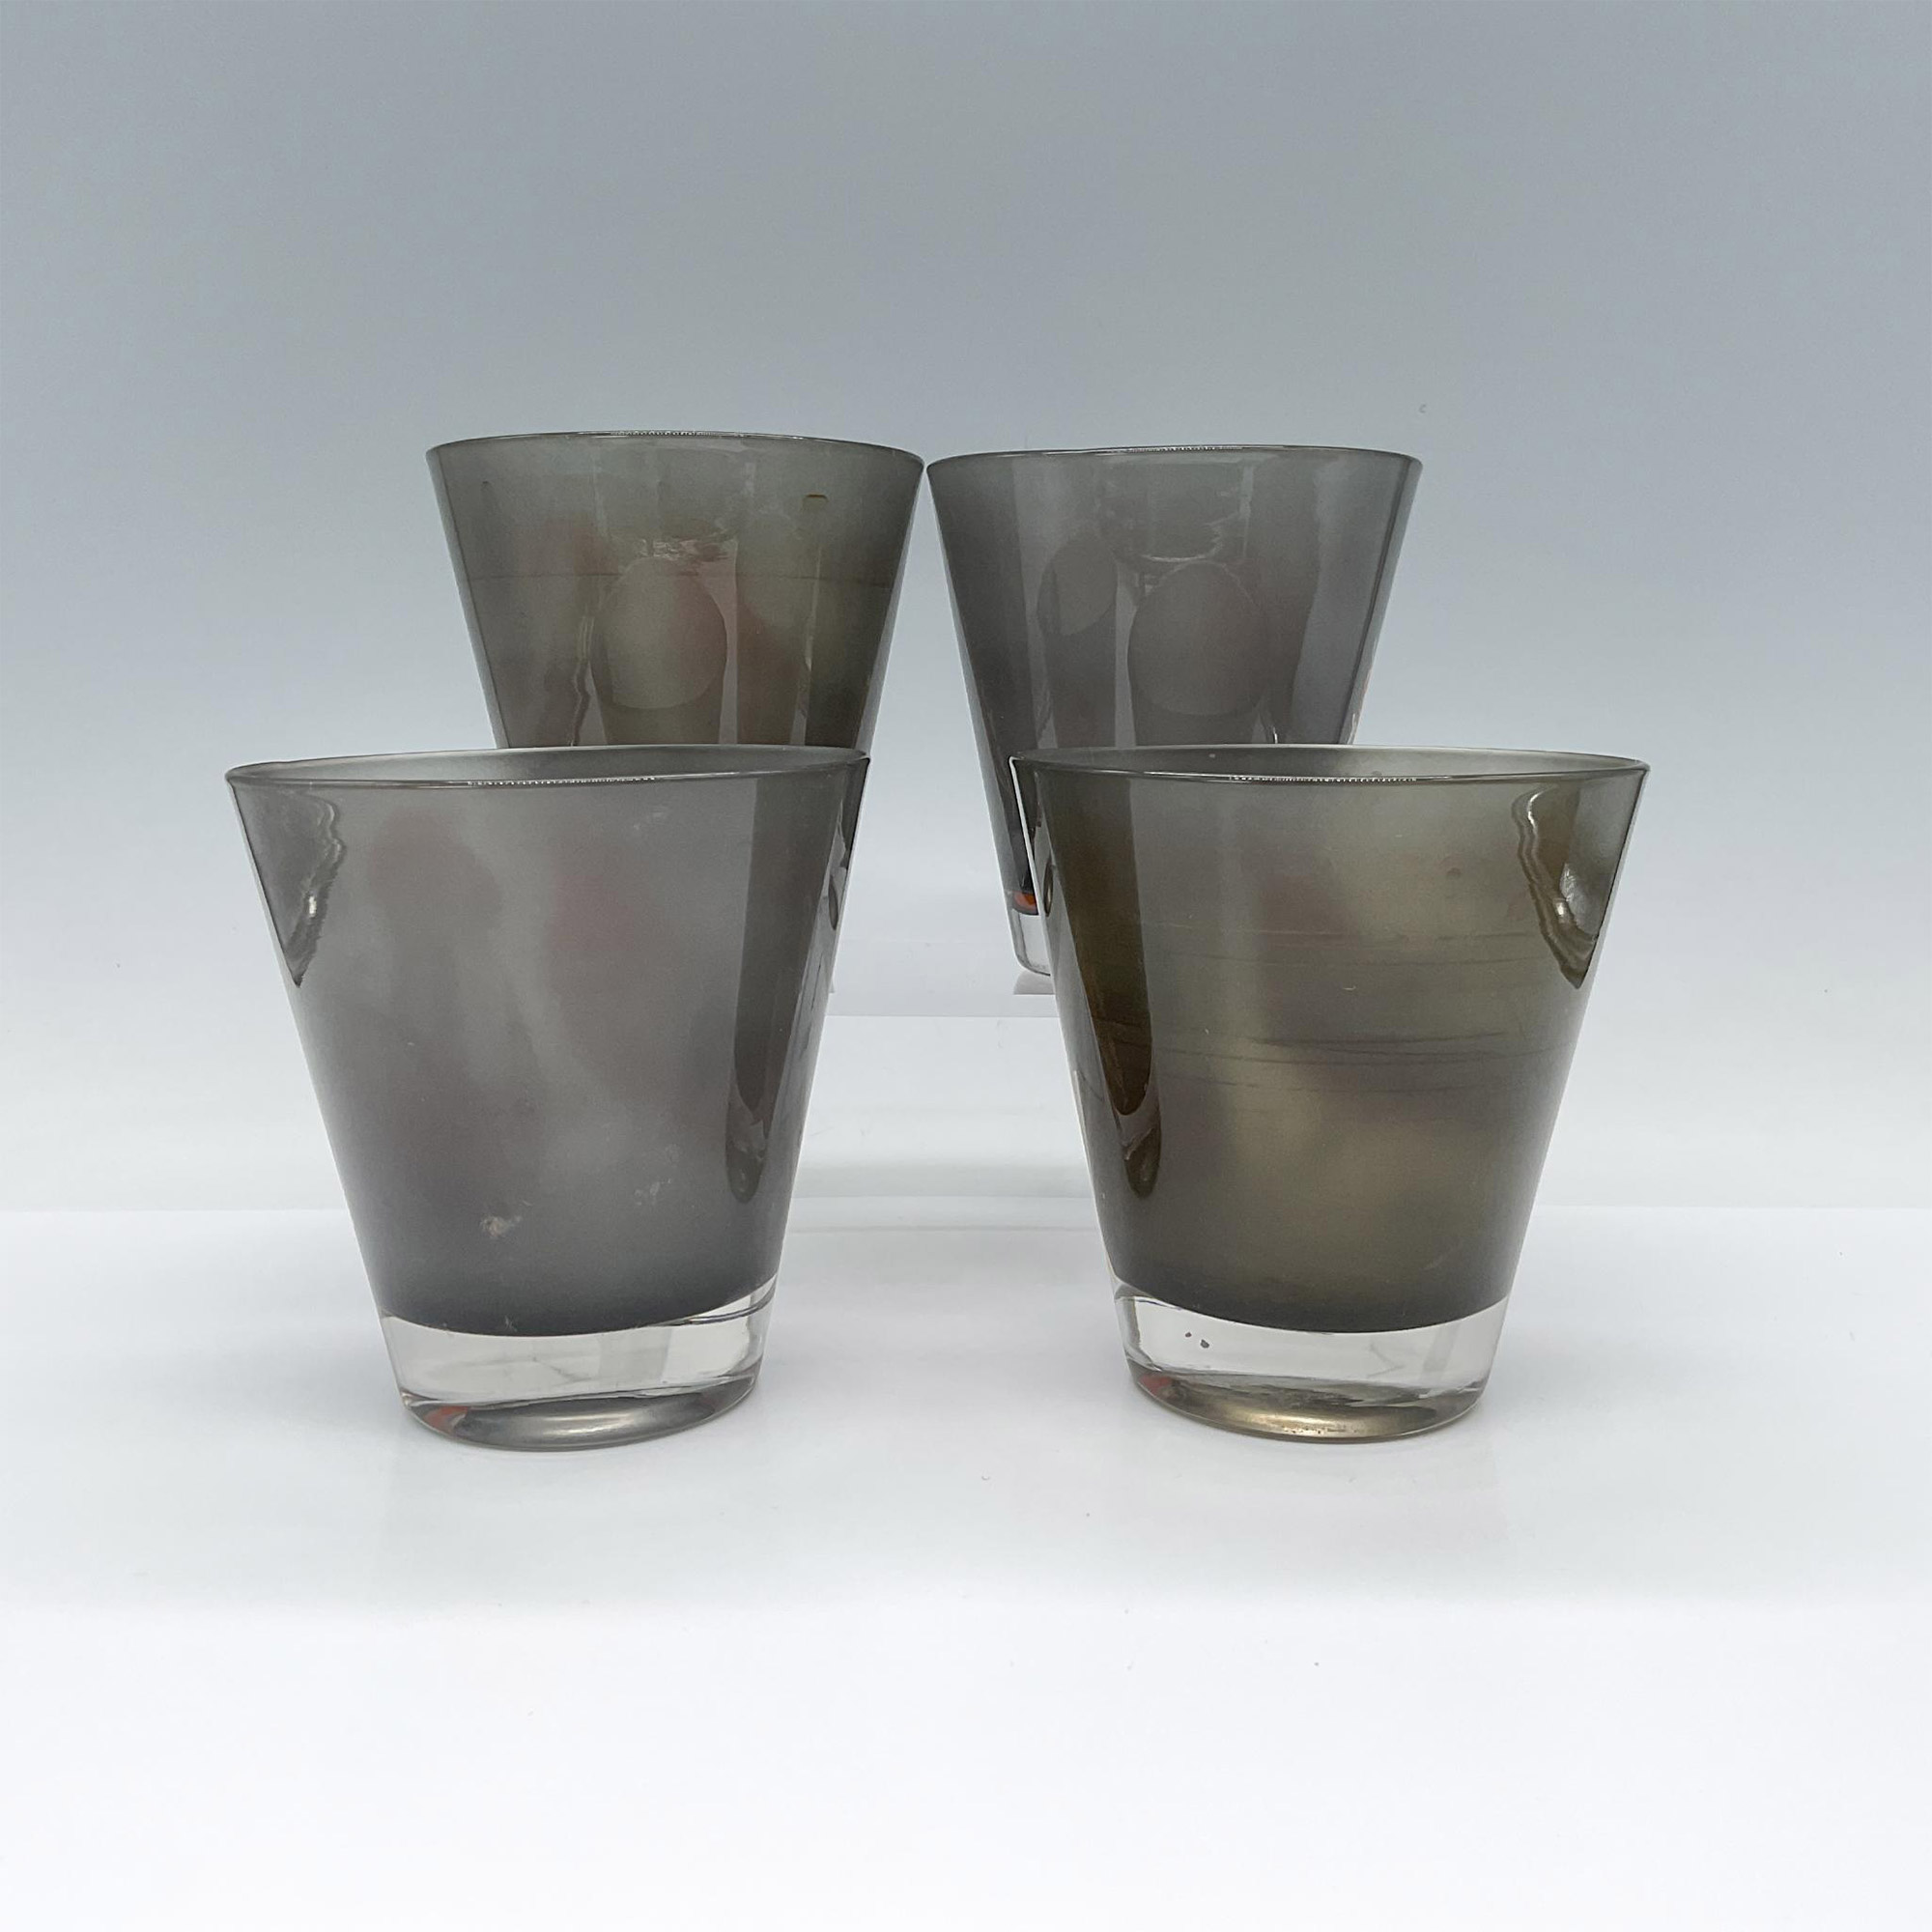 4pc Georges Briard Rocks Glasses - Image 2 of 3